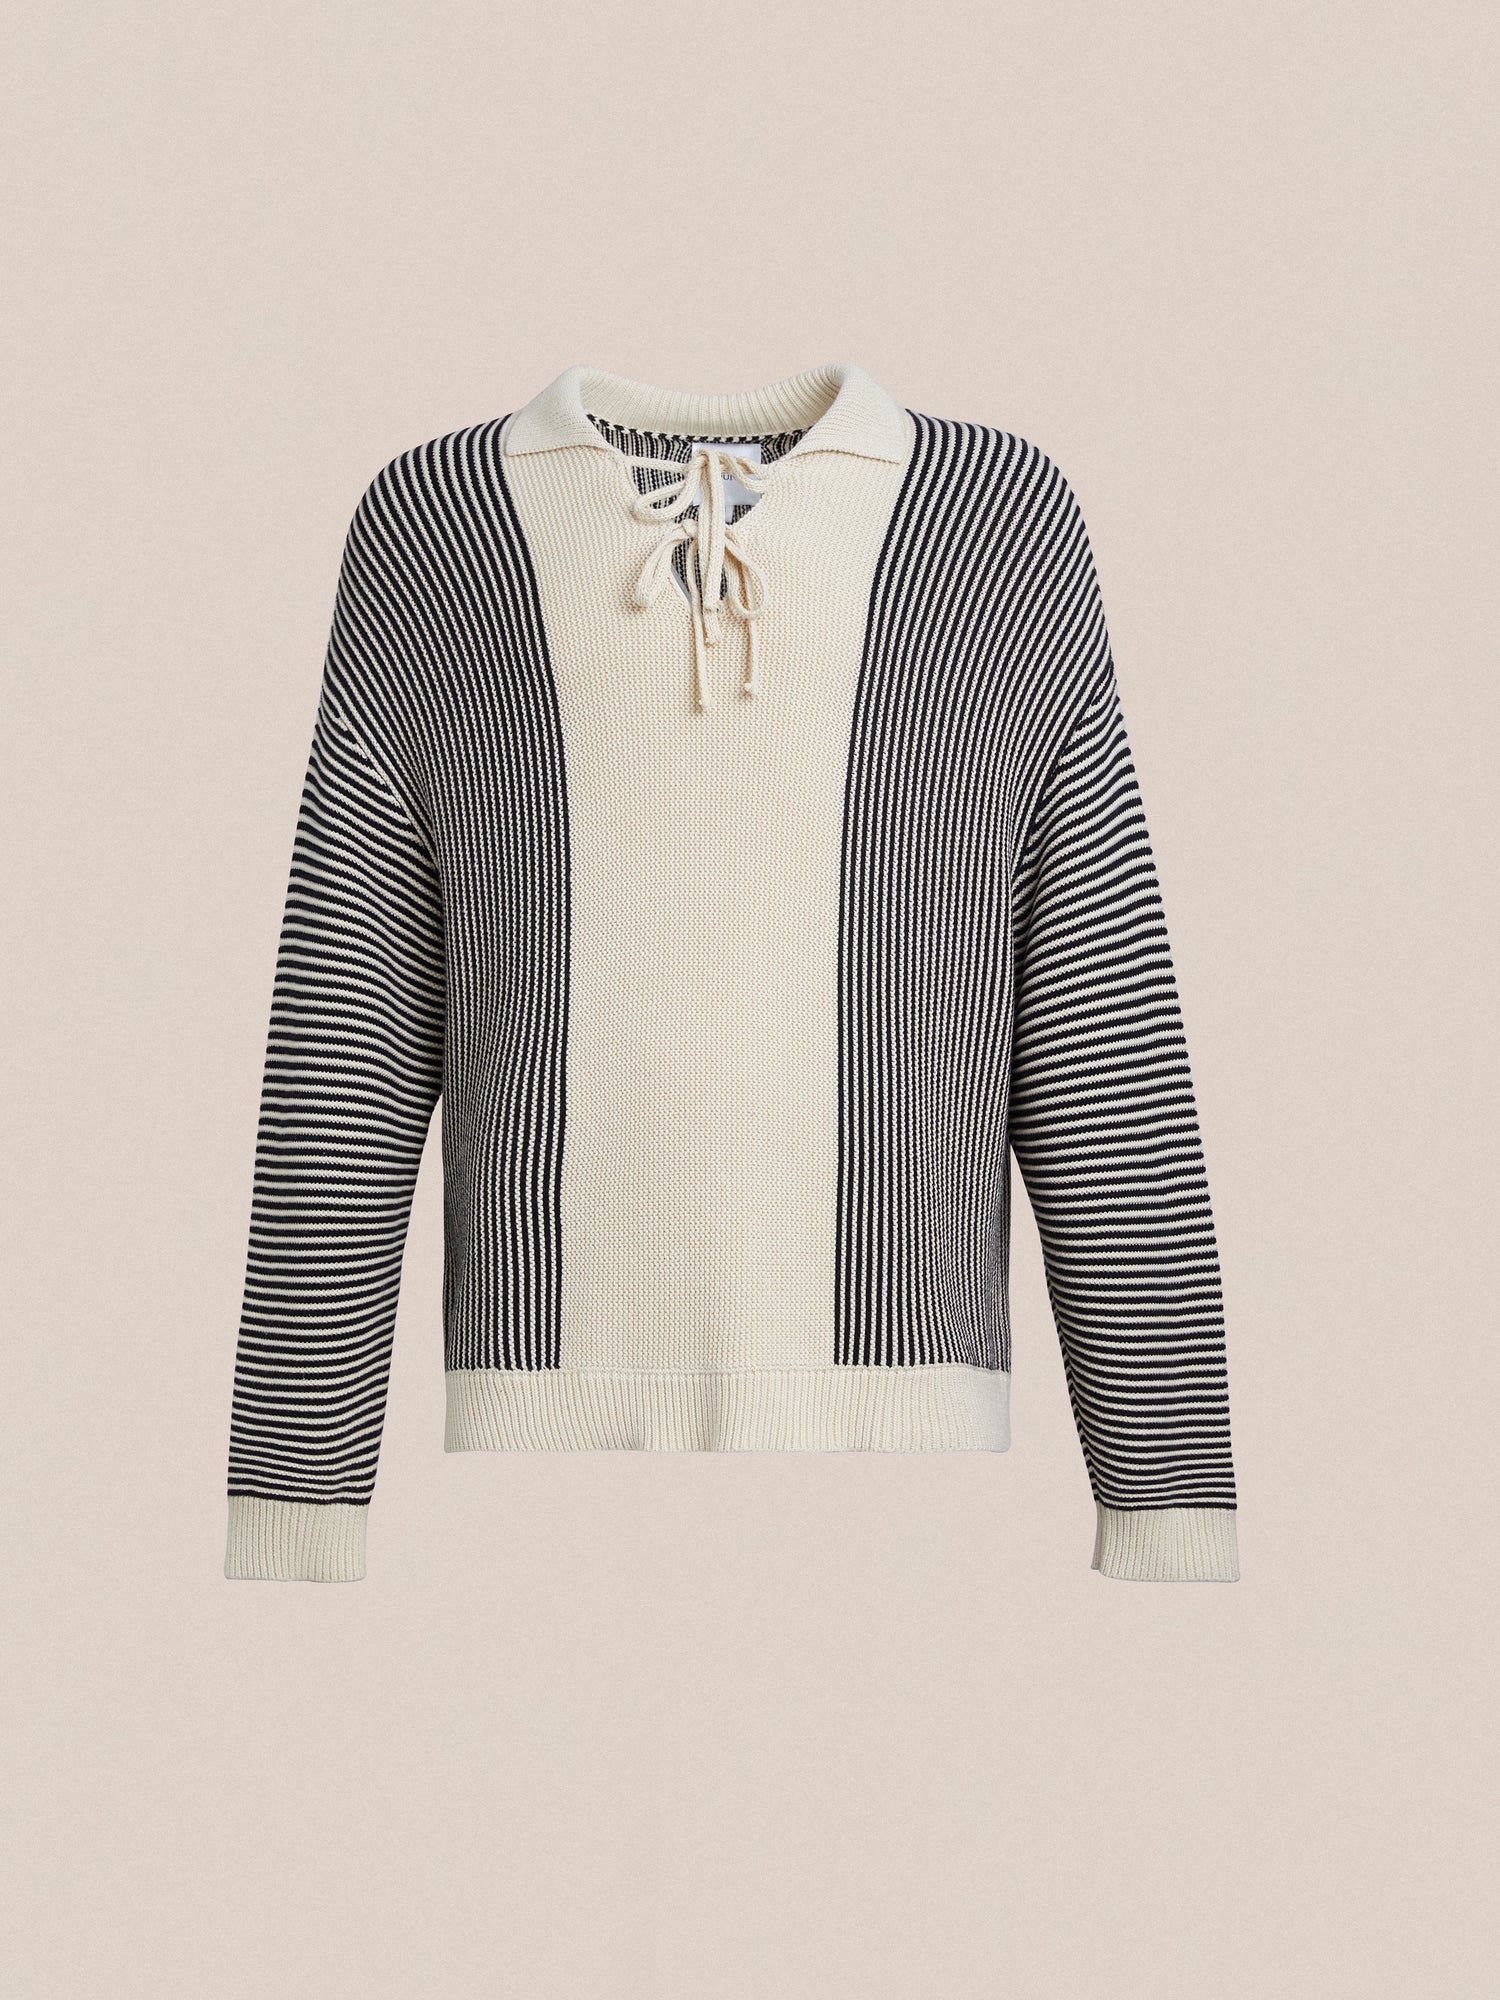 A white and black Found Tabas Tie Knit Collared Sweater with a striped pattern and intricate knit patterns.